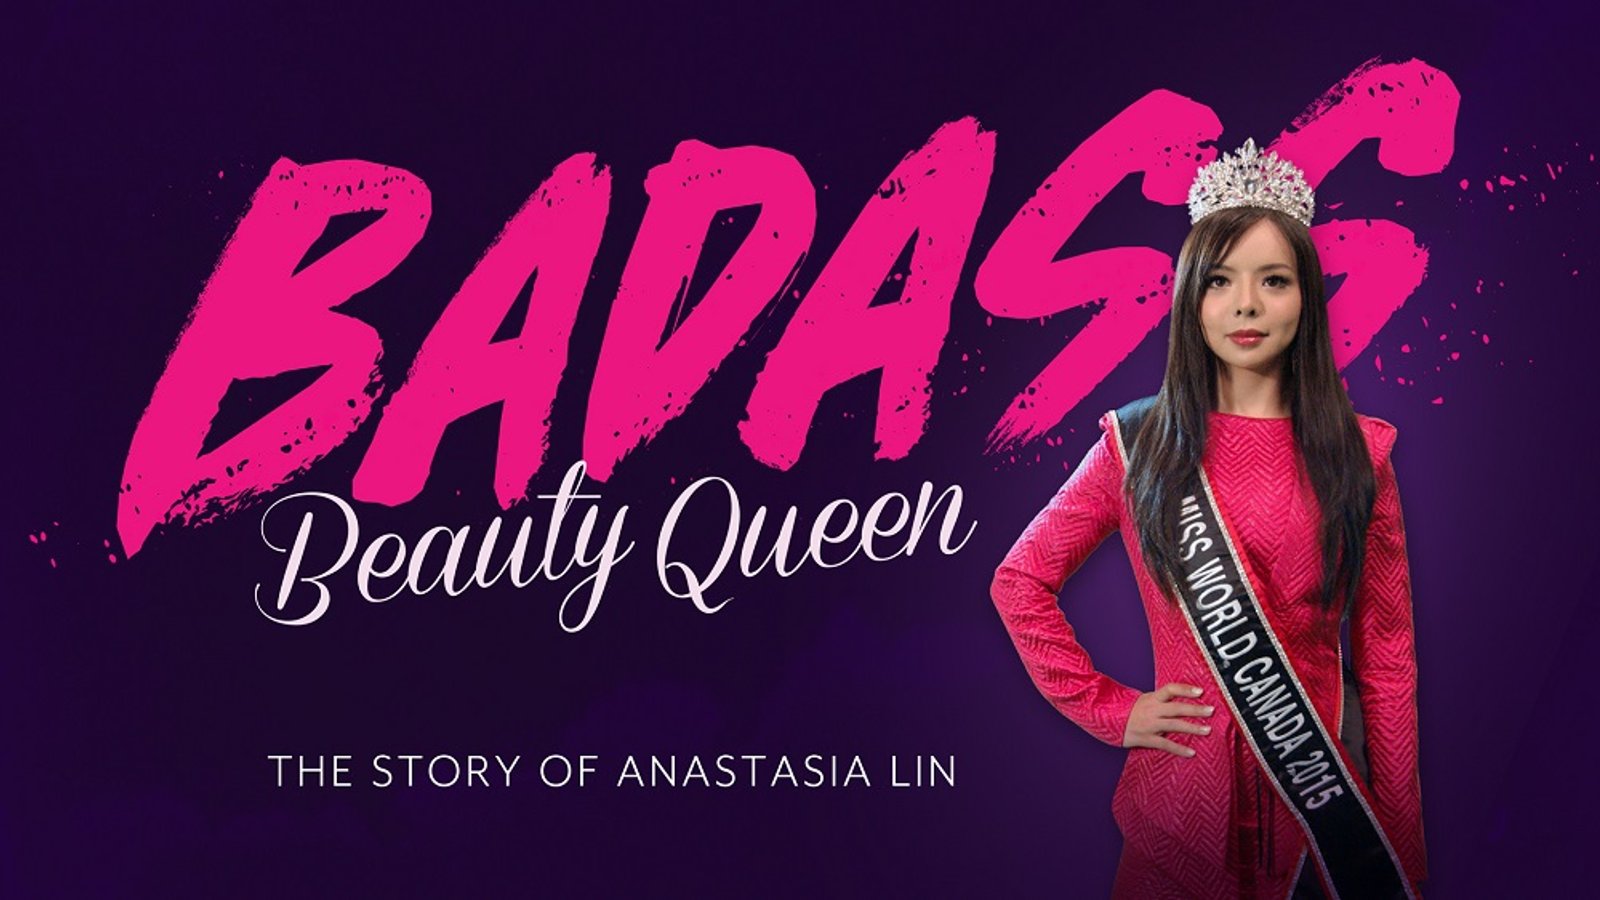 Badass Beauty Queen - Fighting For Human Rights in China